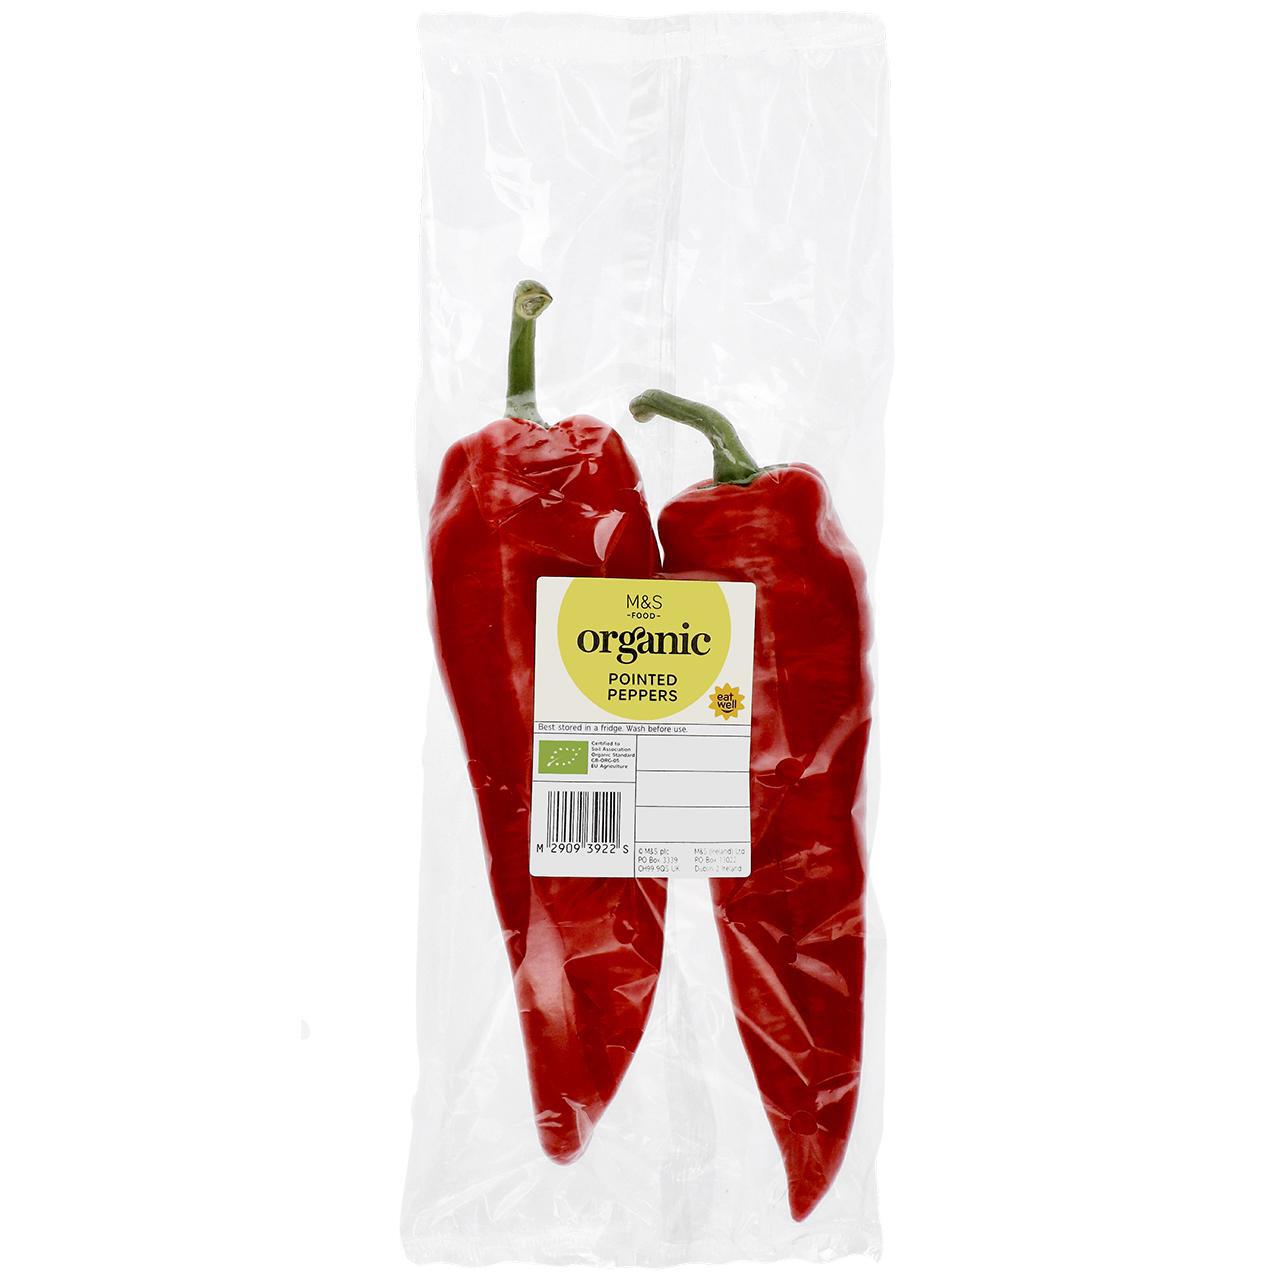 M&S Organic Pointed Peppers